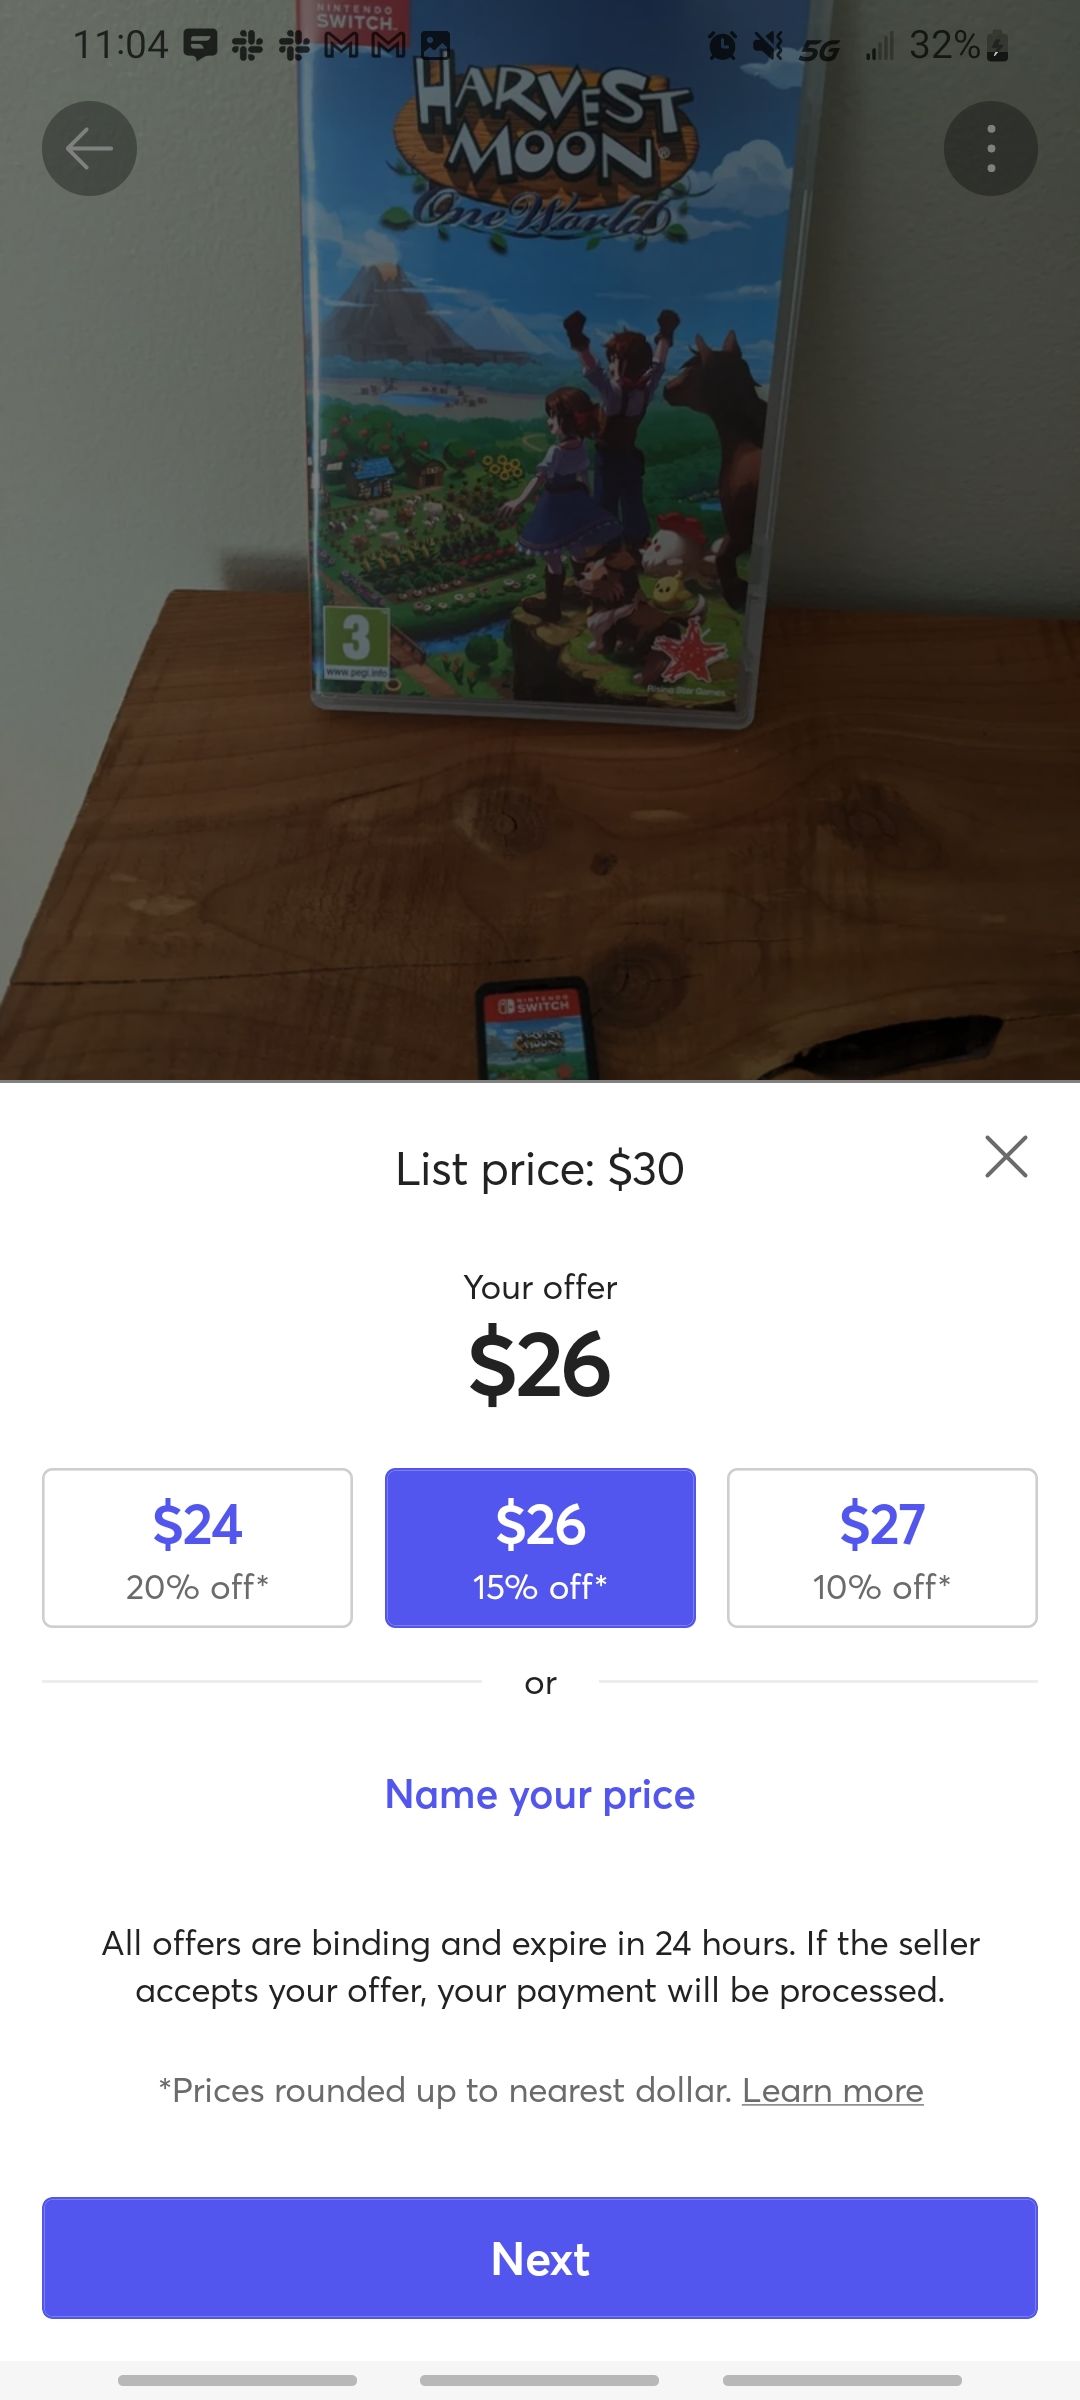 mercari app making an offer on another seller's listing